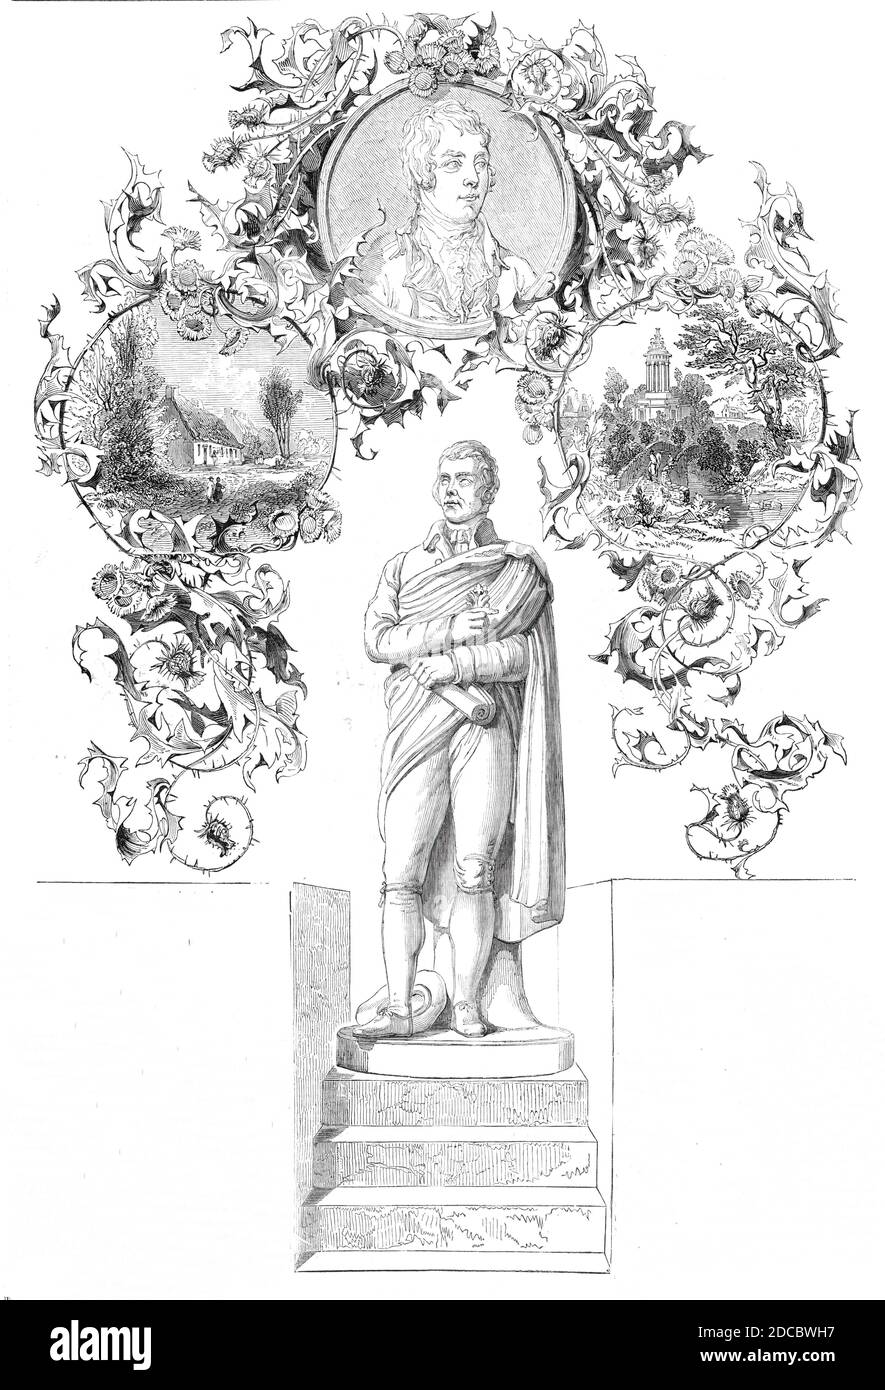 Statue of Burns, by Flaxman, 1844. After a sculpture of Scottish poet Robert Burns, by John Flaxman. From &quot;Illustrated London News&quot;, 1844, Vol I. Stock Photo